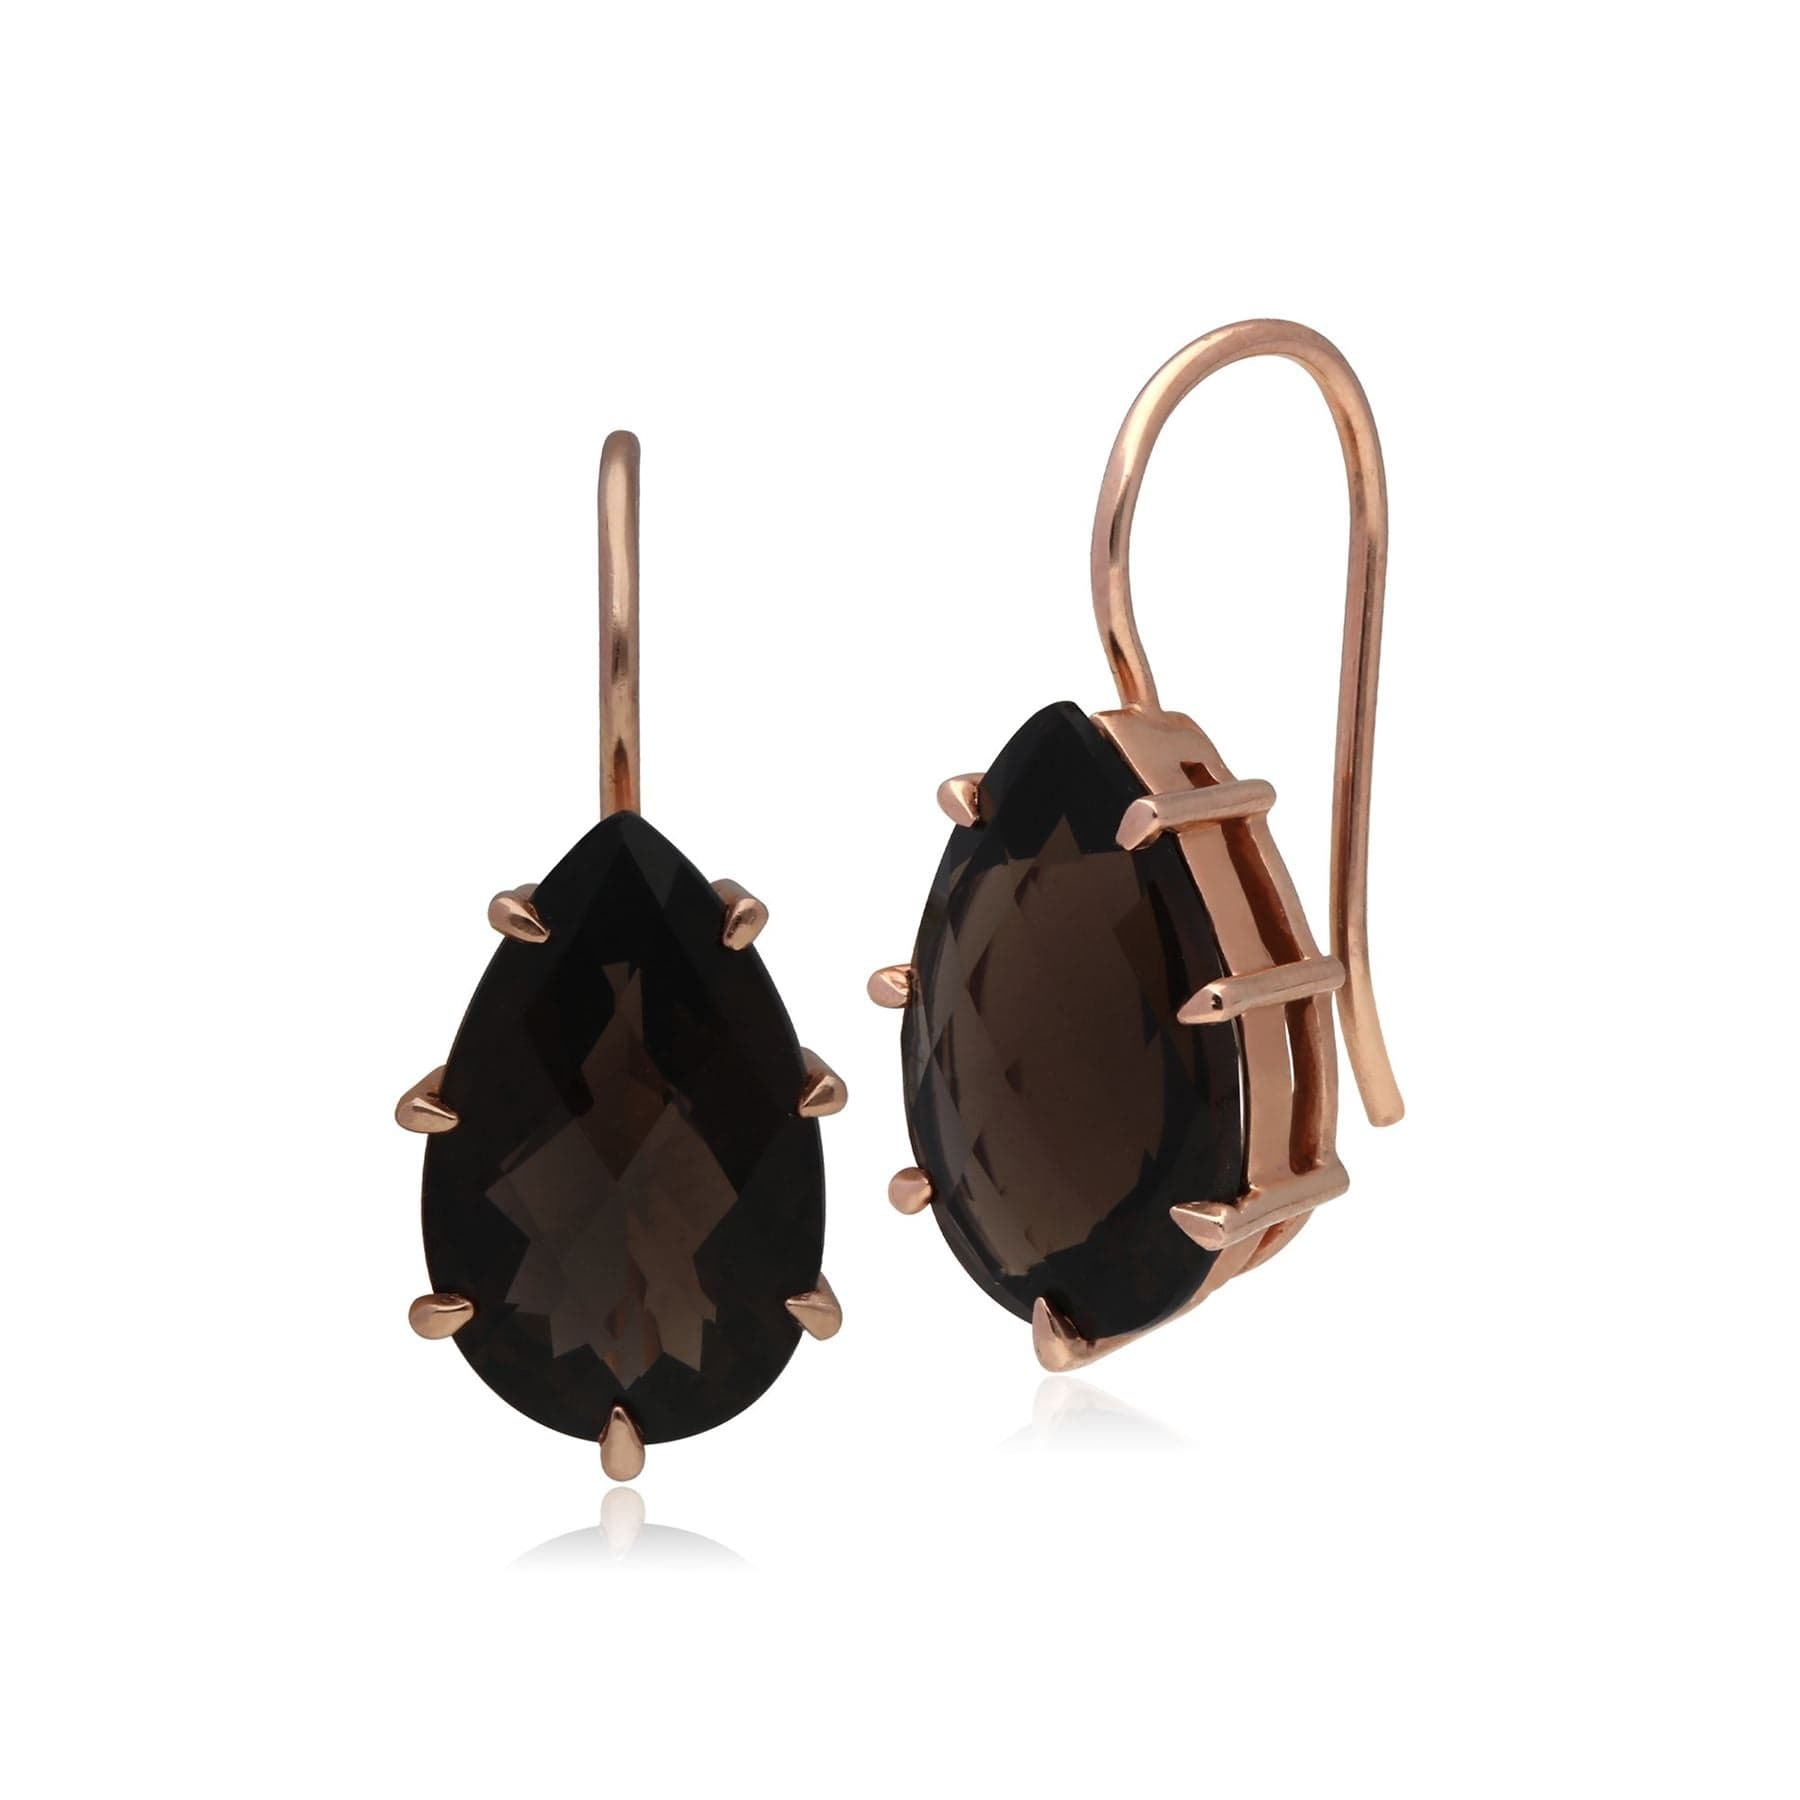 T0961E9071 Kosmos Smokey Quartz Earrings in Rose Gold Plated Sterling Silver 1